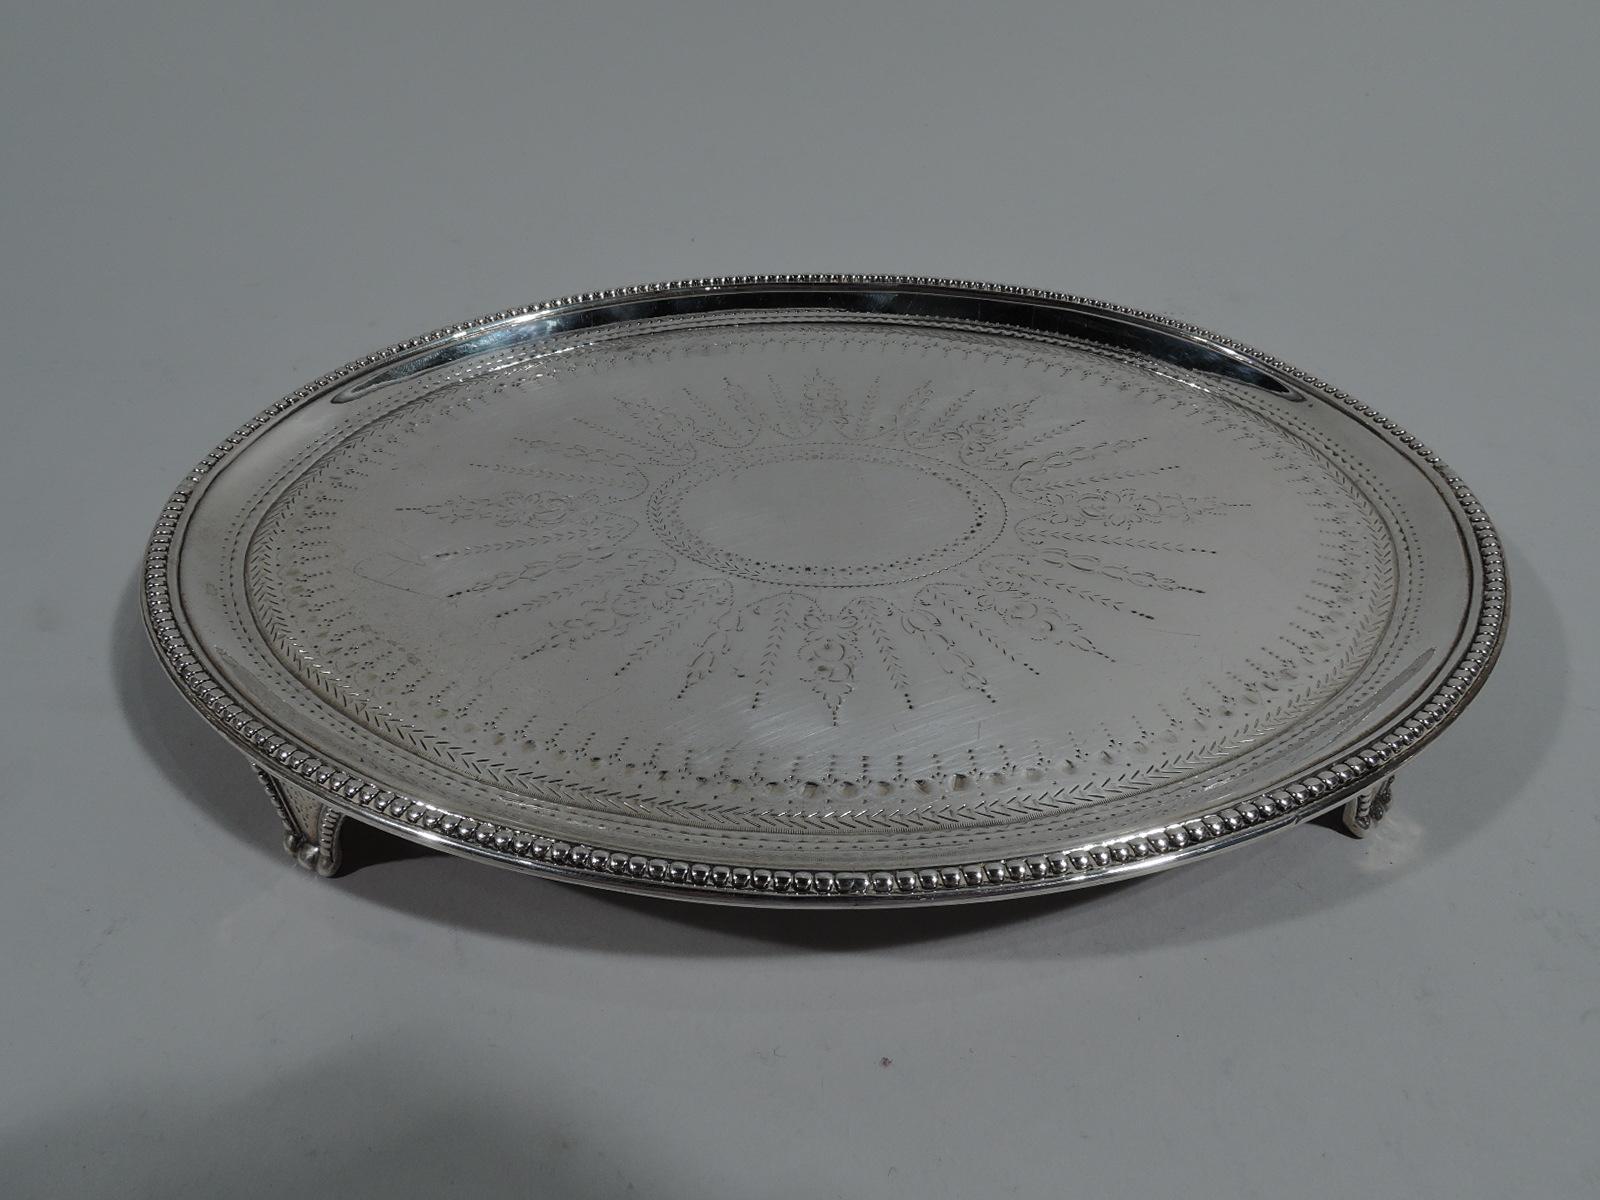 Pair of George III sterling silver salvers. Made by Elizabeth Jones in London in 1784. Each: Oval with beeded rim and 4 beaded triangular supports. Neoclassical ornament including large central patera (vacant) engraved on well. Supports same. Fully